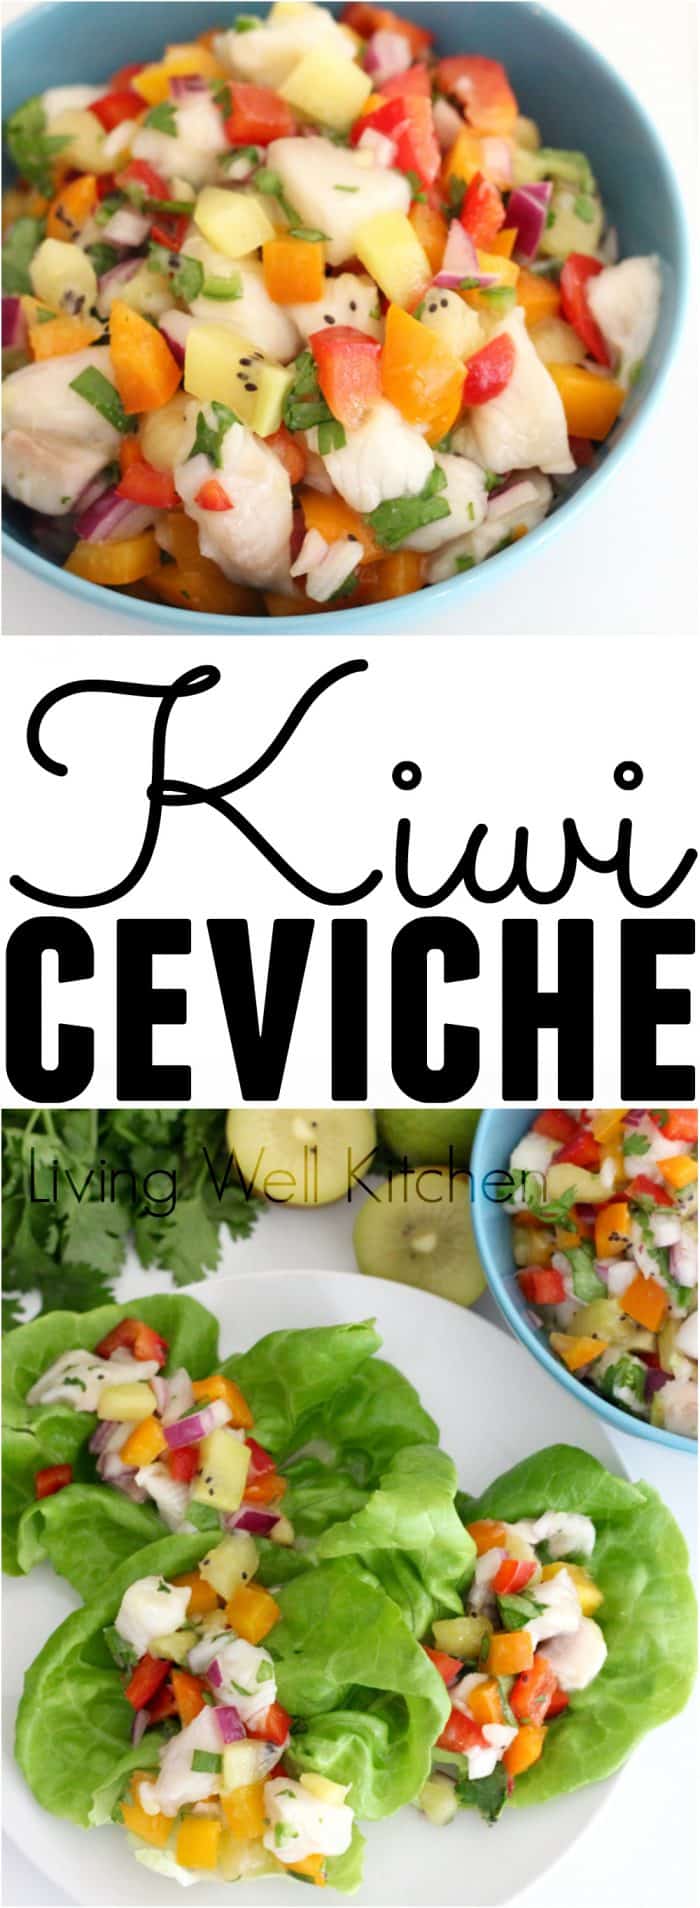 Kiwi Ceviche from @memeinge is a refreshing and delicious main meal or appetizer perfect for enjoying in the warm weather. Gluten free, dairy free, and soy free